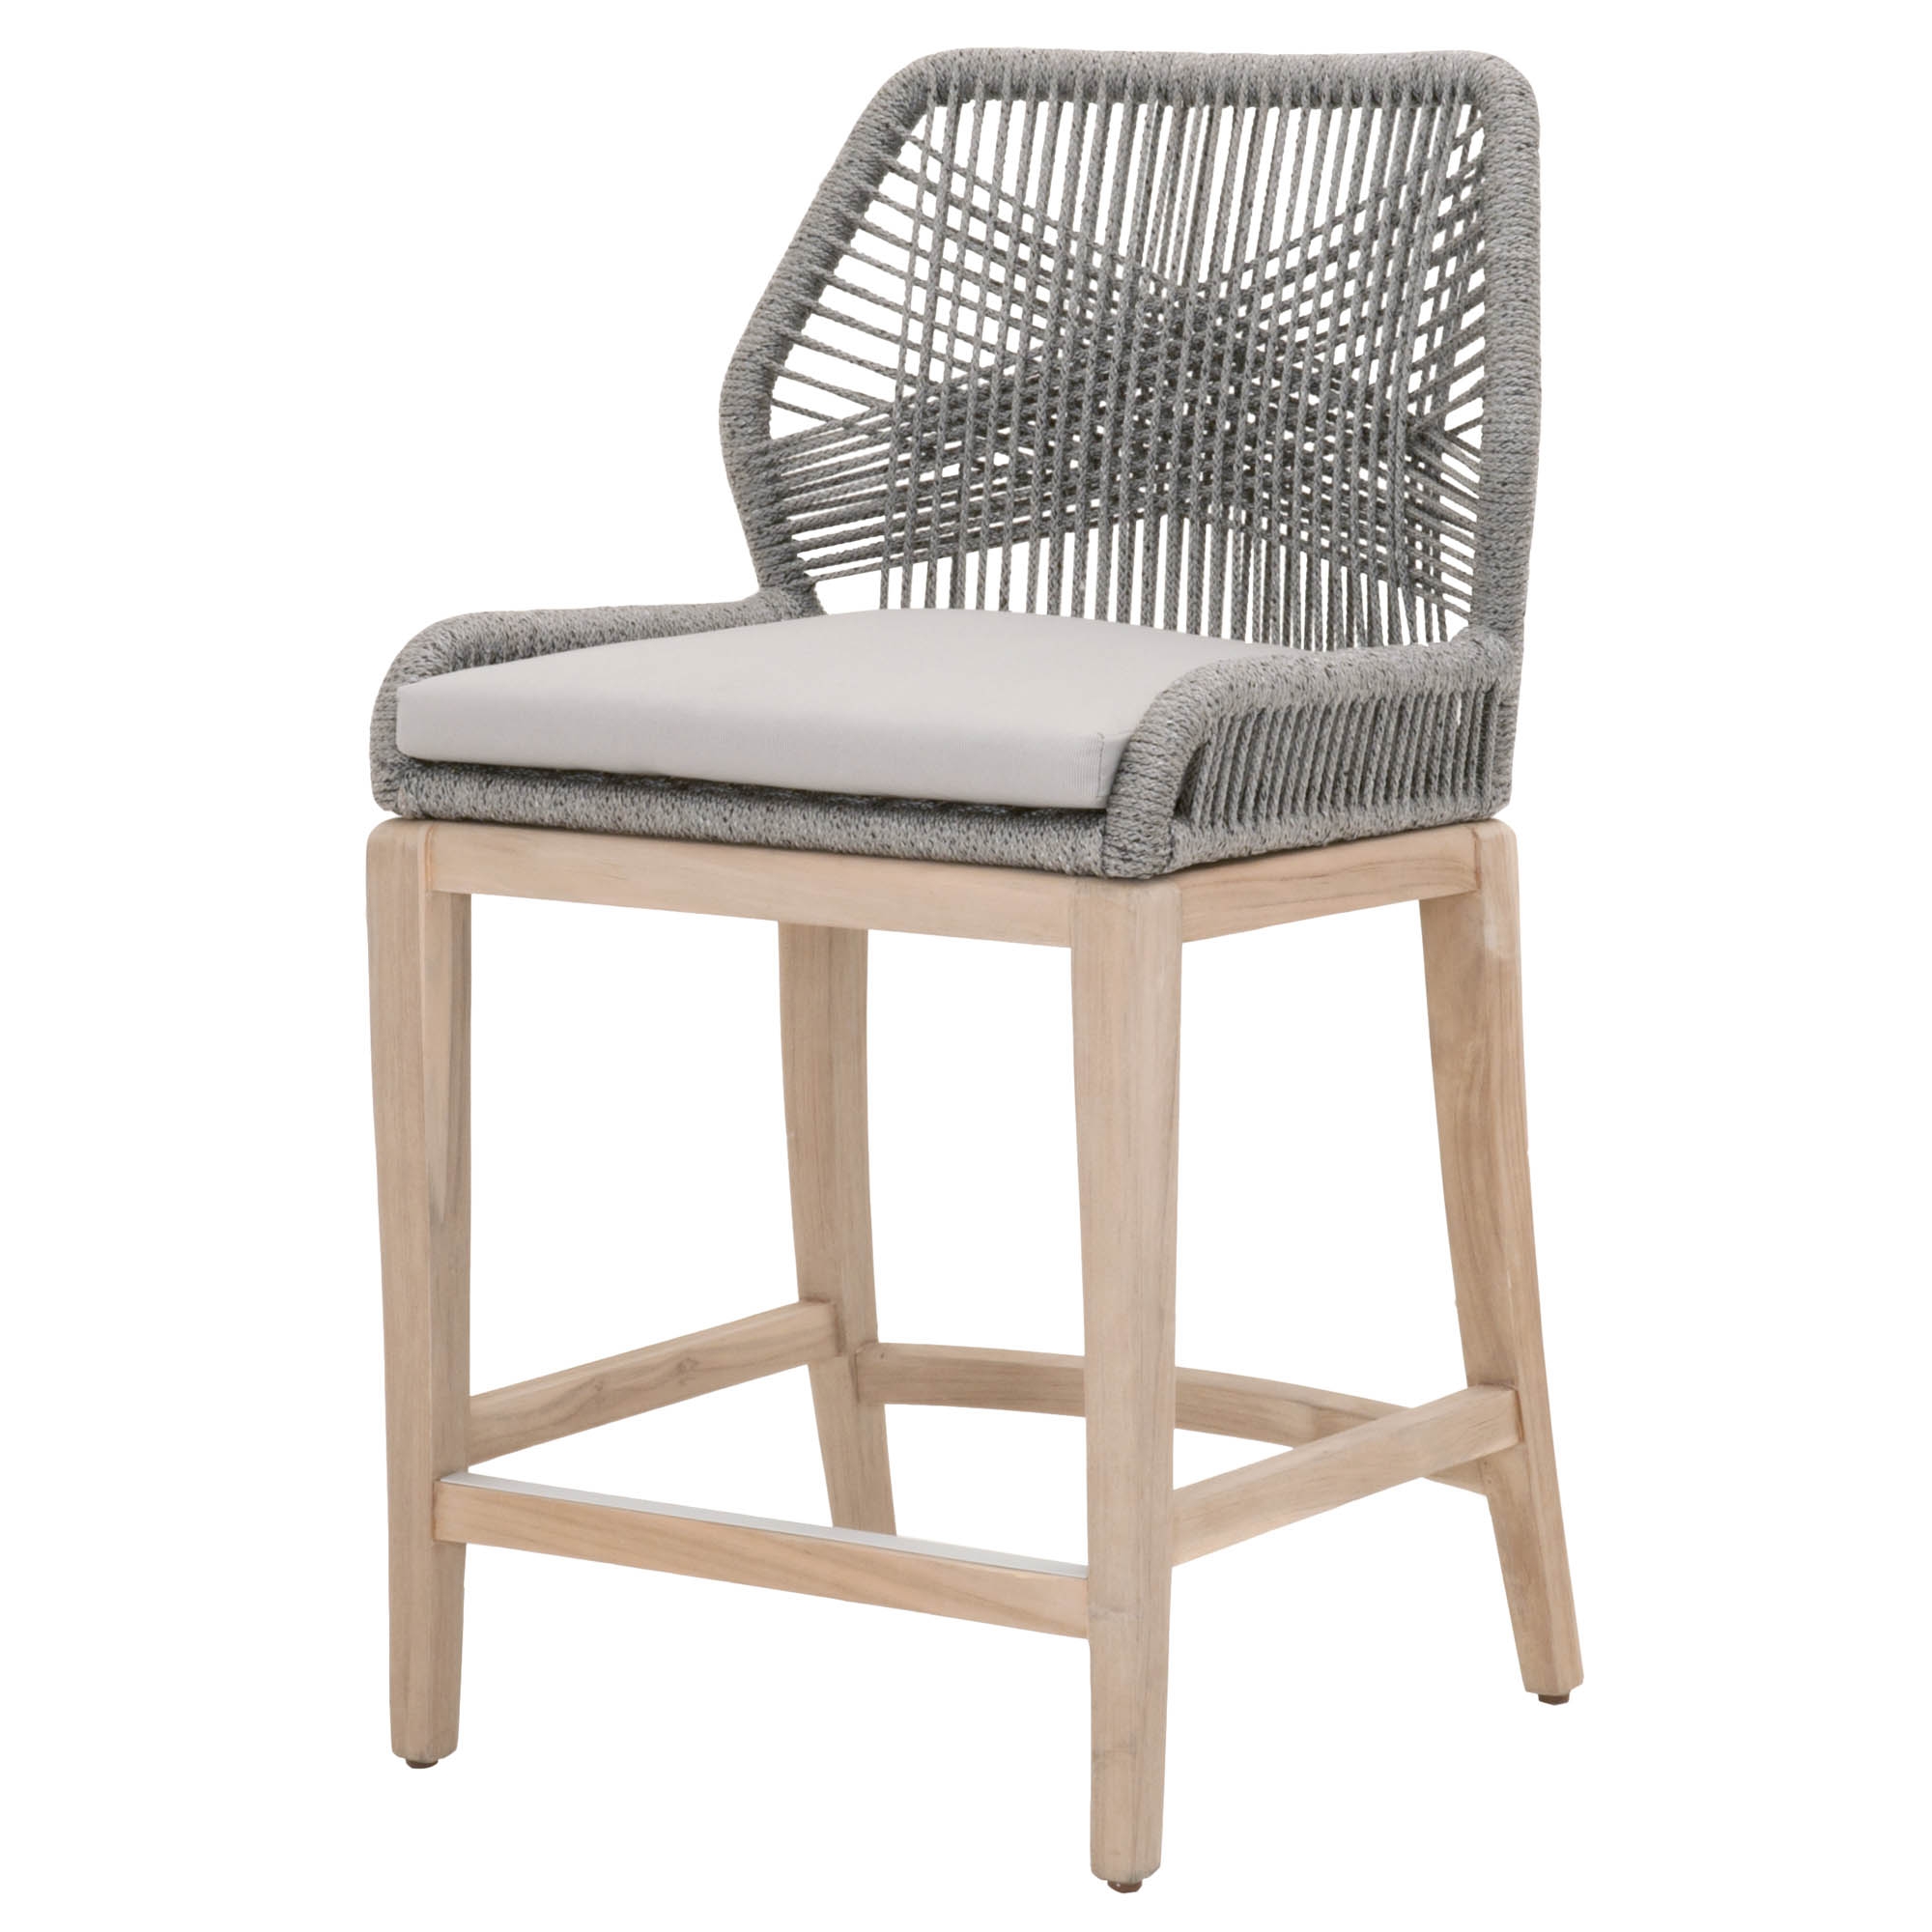 Loom Outdoor Counter Stool - Image 1